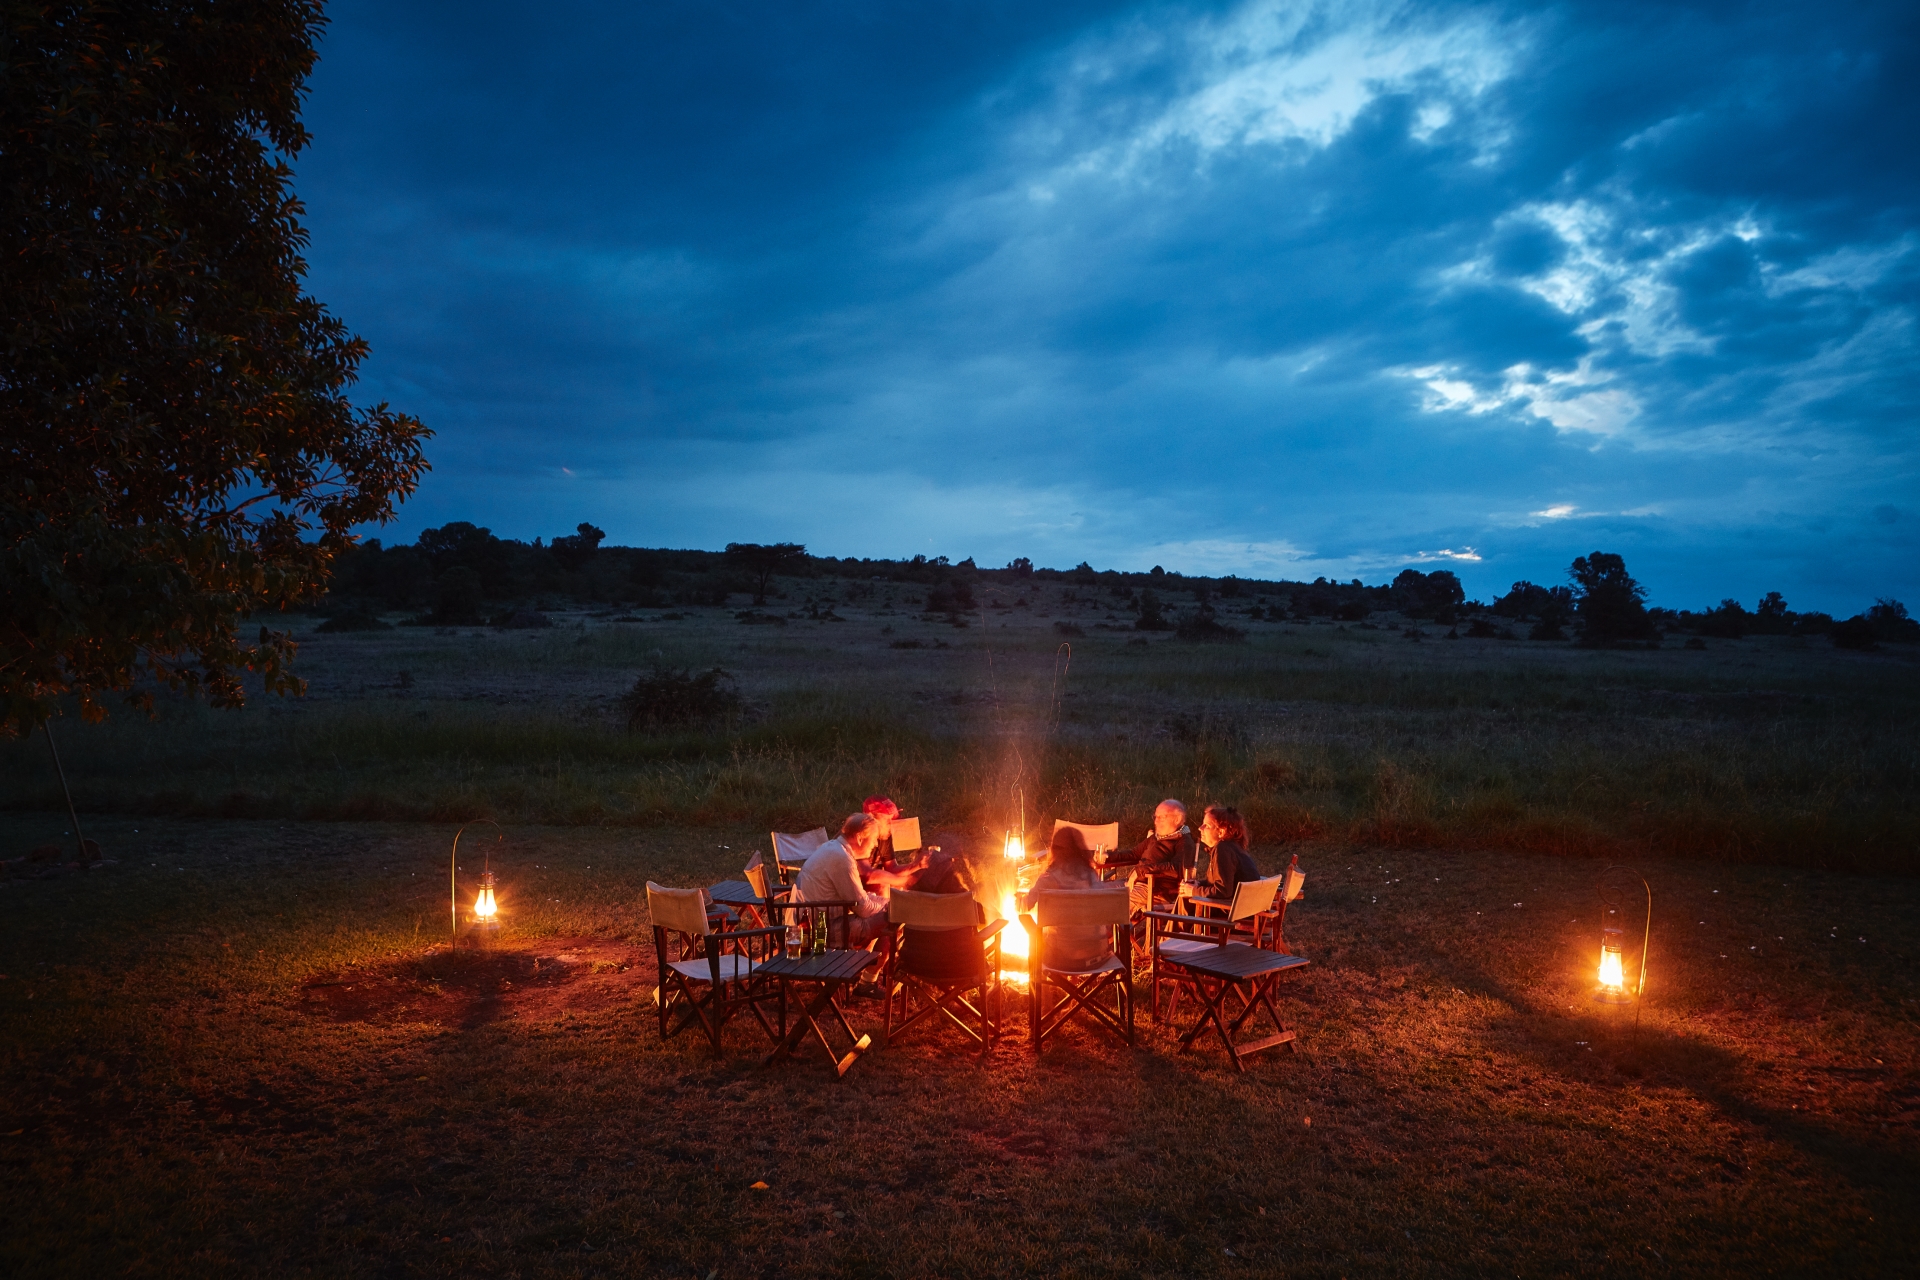 Fire at night in the Mara 